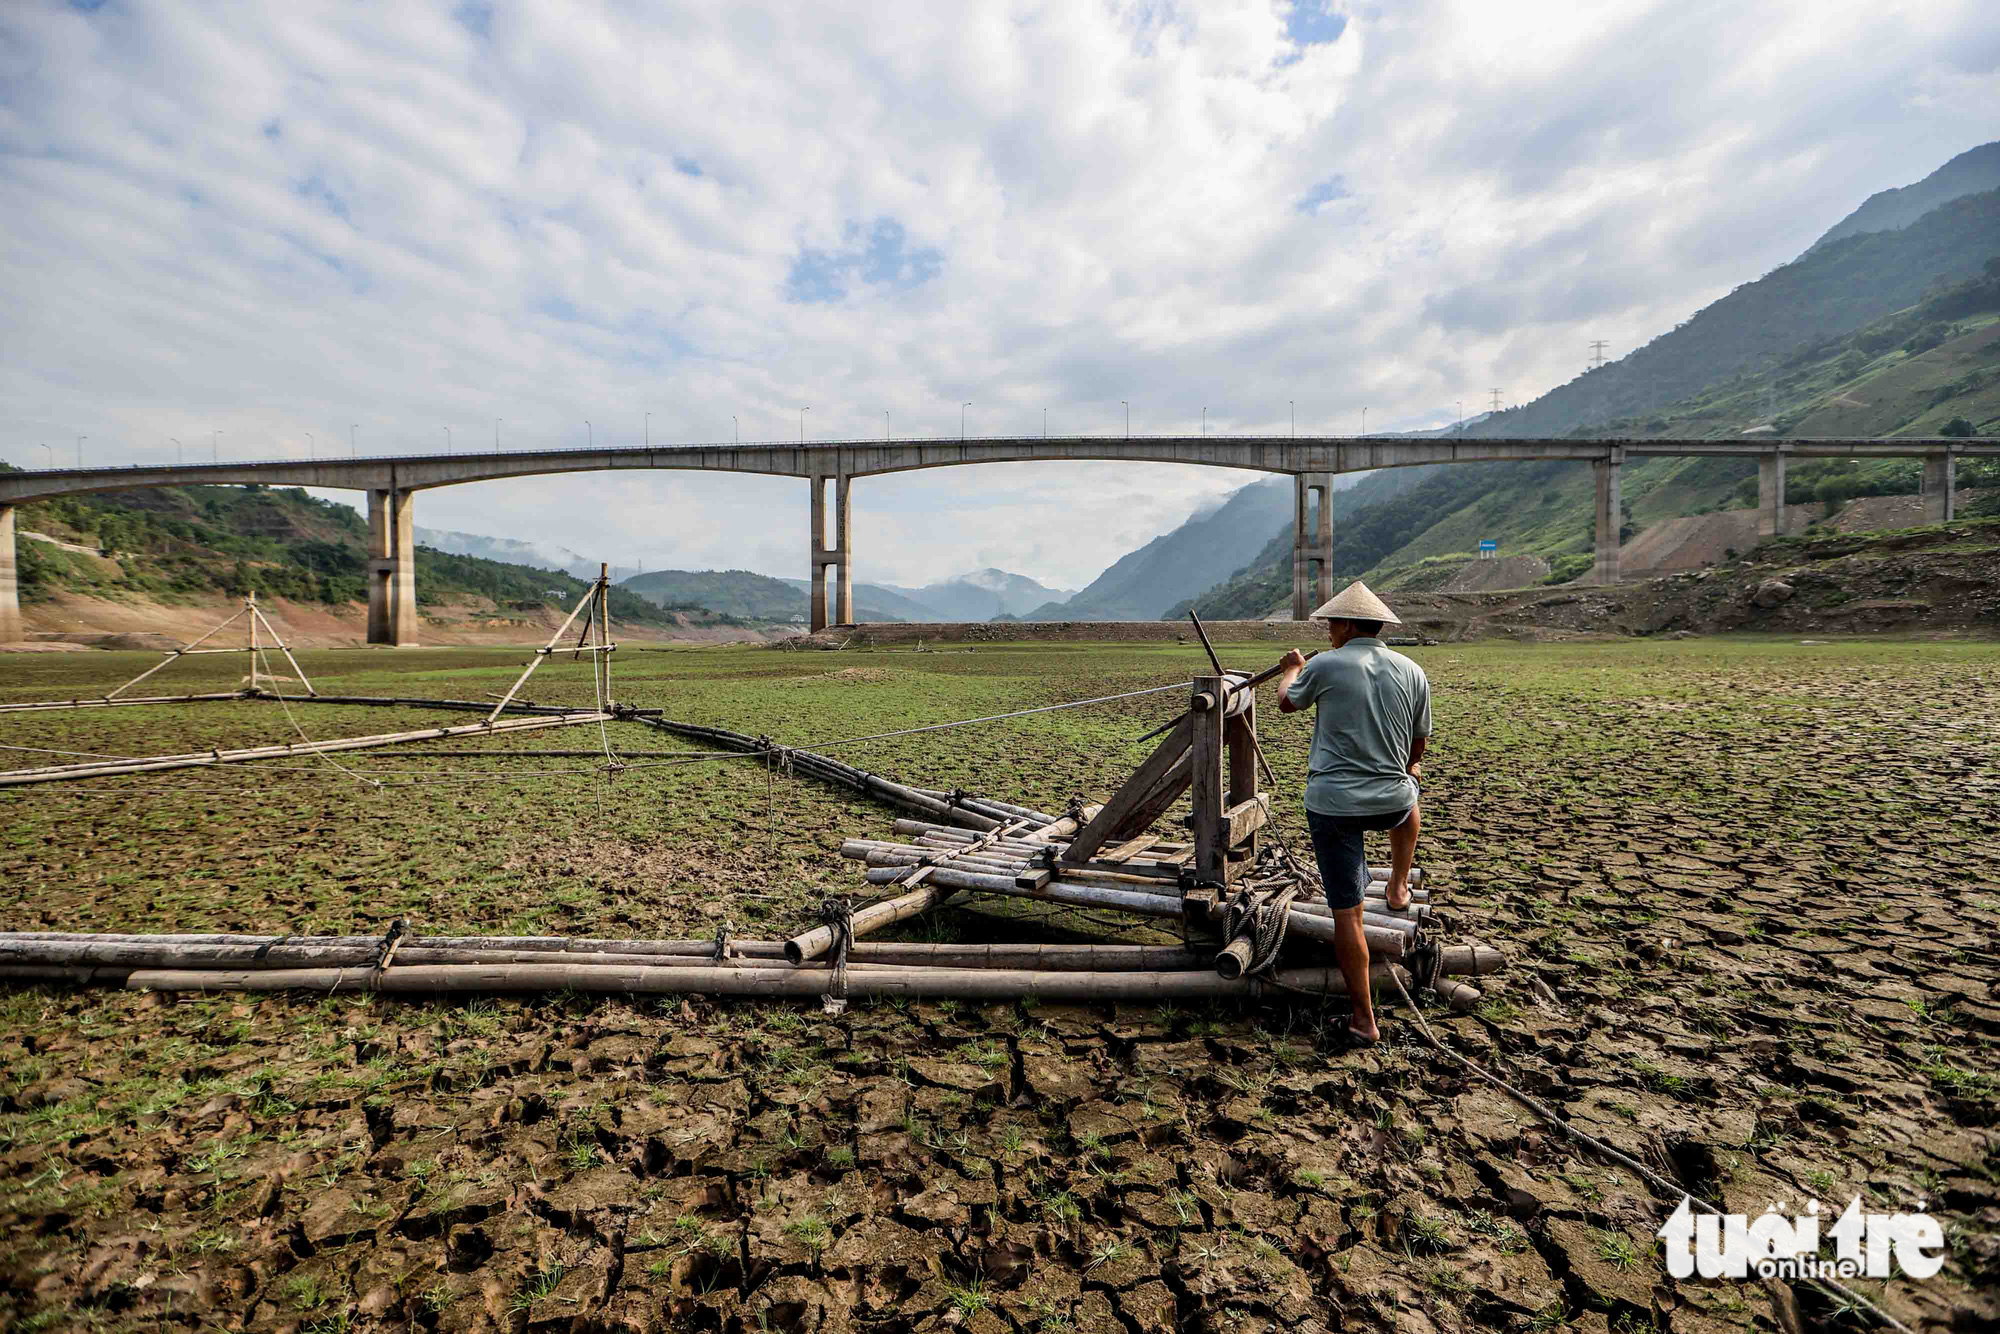 Vang Van Vuong, a local inhabitant in the Son La hydropower reservoir area, stands next to his family's lift net on the dried-up reservoir bed. Photo: Nguyen Khanh / Tuoi Tre